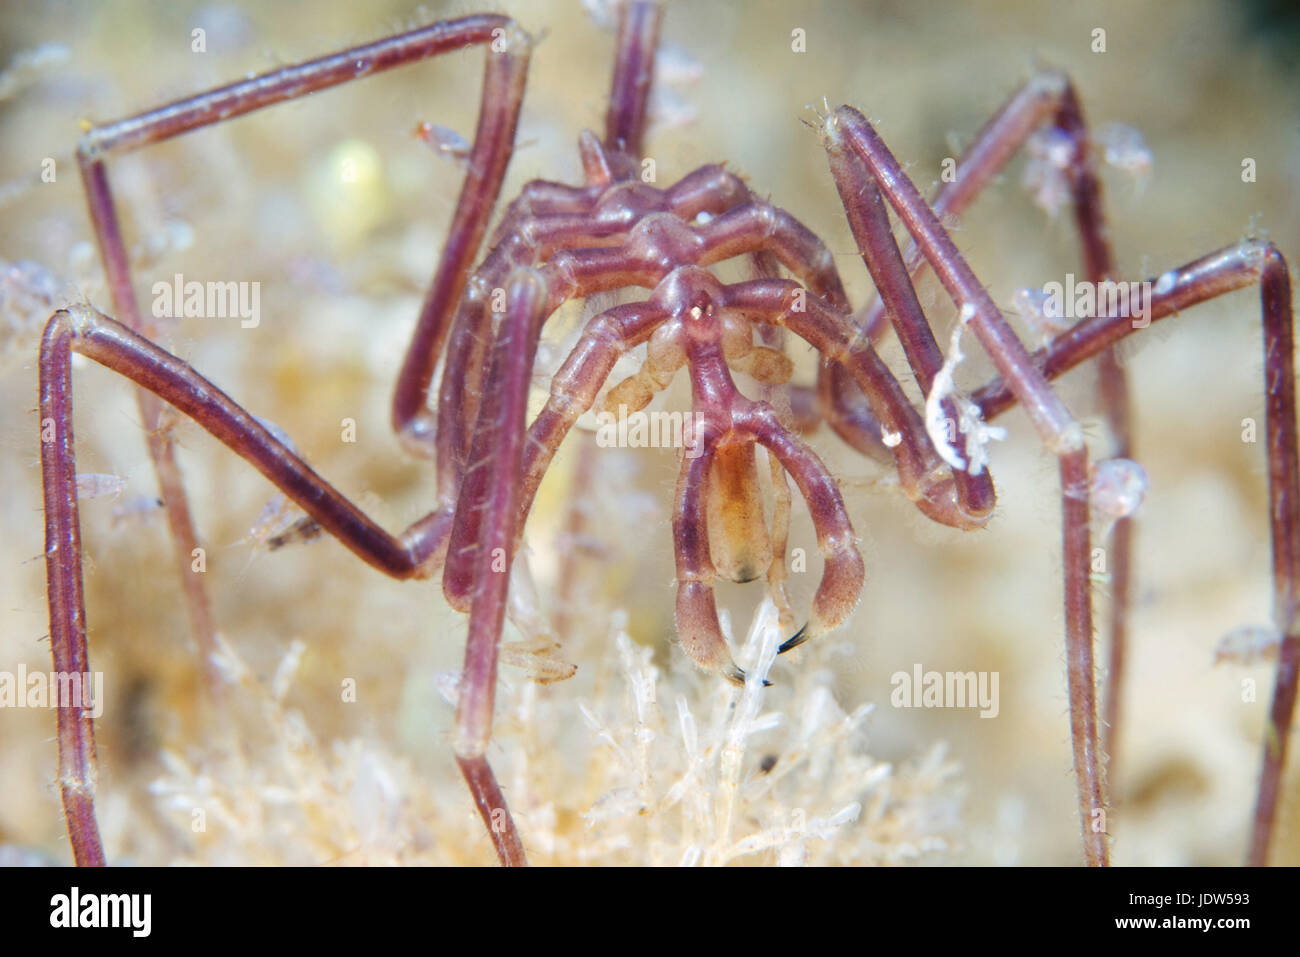 Nymphon grossipes sea spider Stock Photo